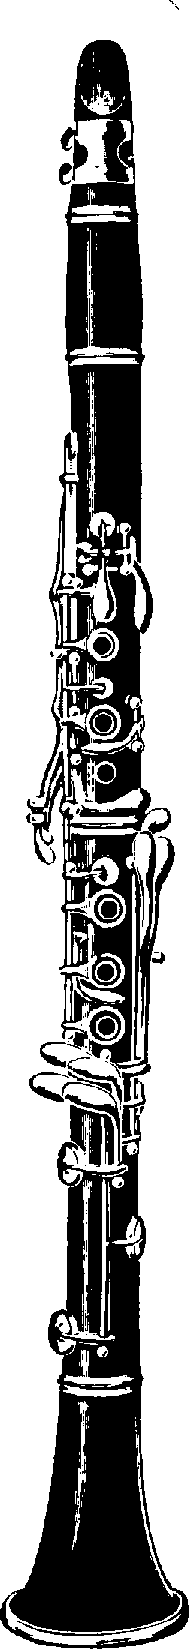 Free Clarinet Cliparts, Download Free Clip Art, Free Clip Art on.